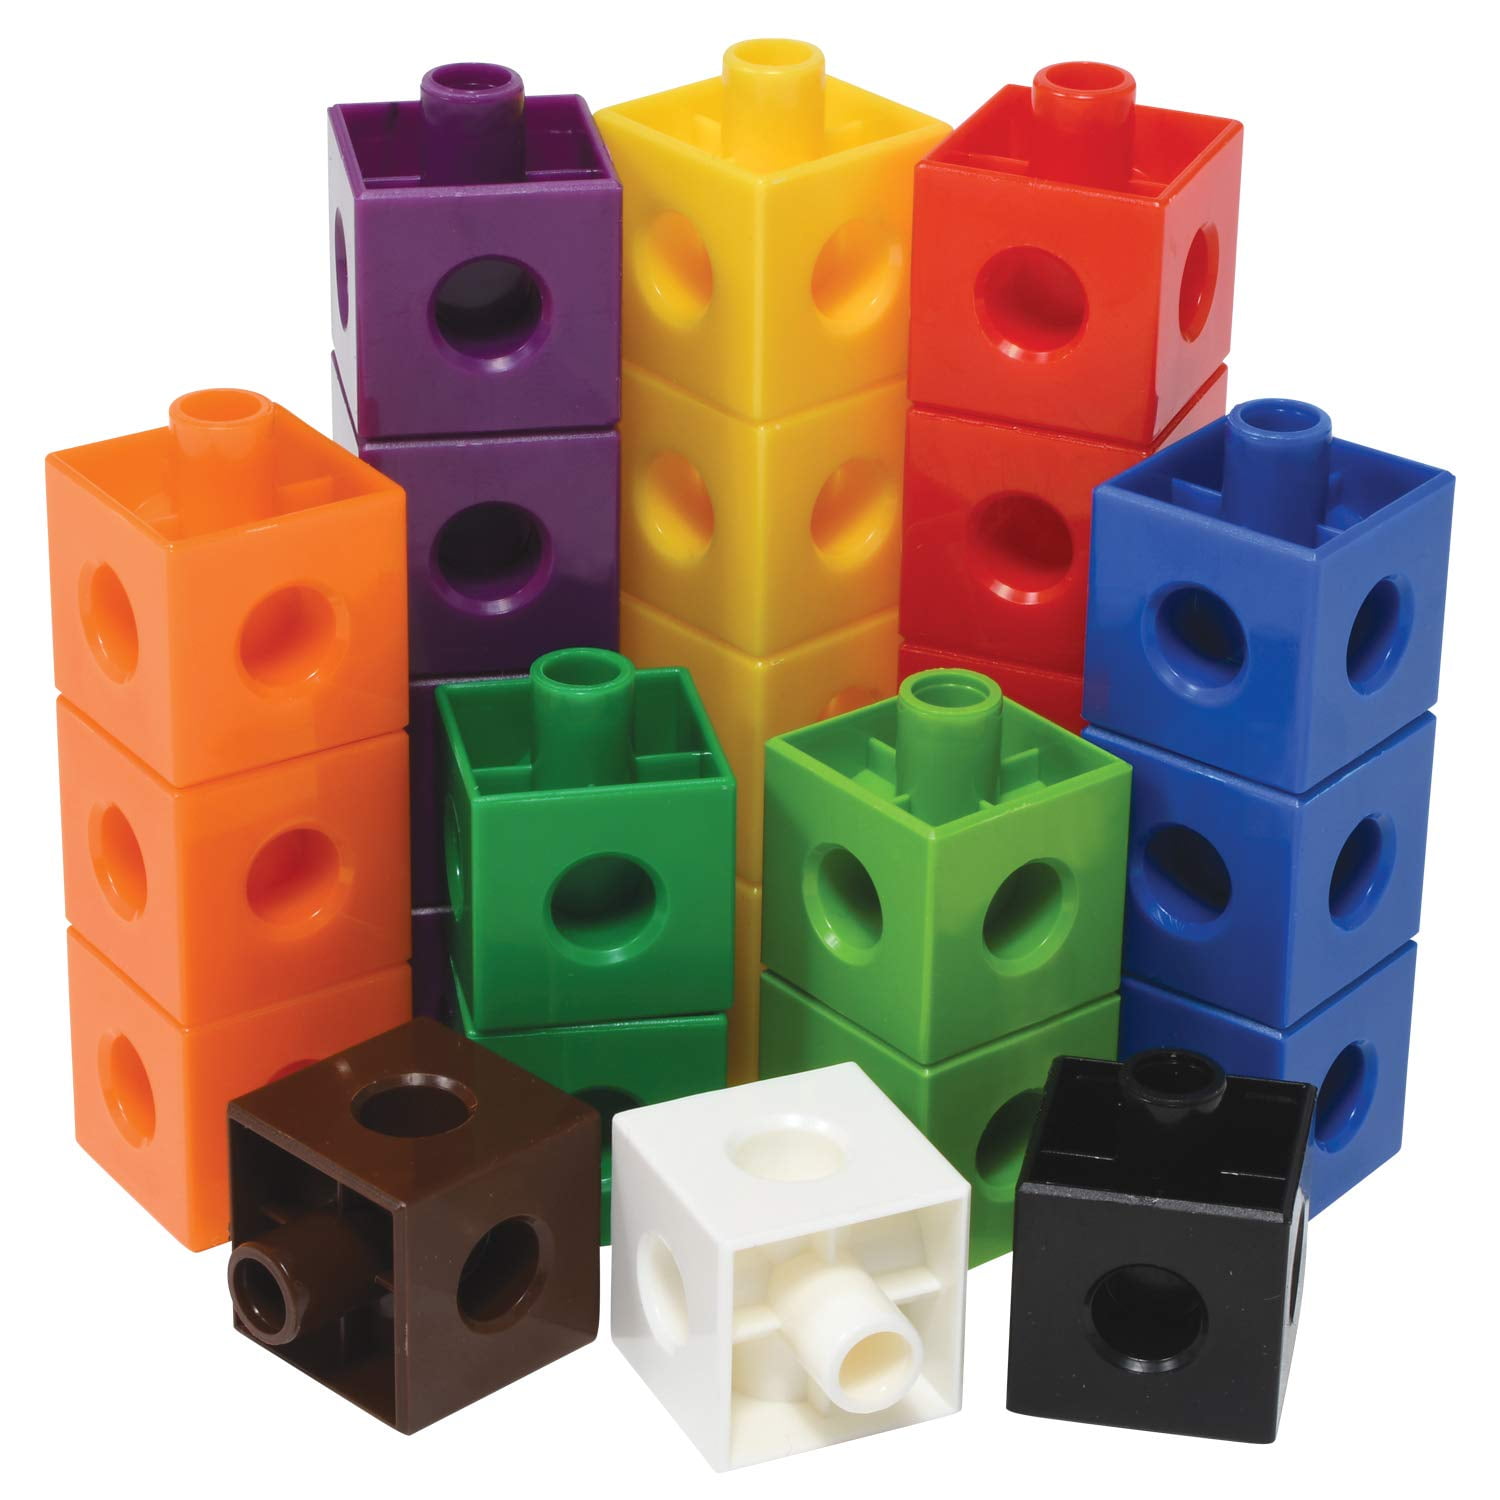 200 Snap Cubes Early Education Math Linking Cubes Interlocking Learning Toys 